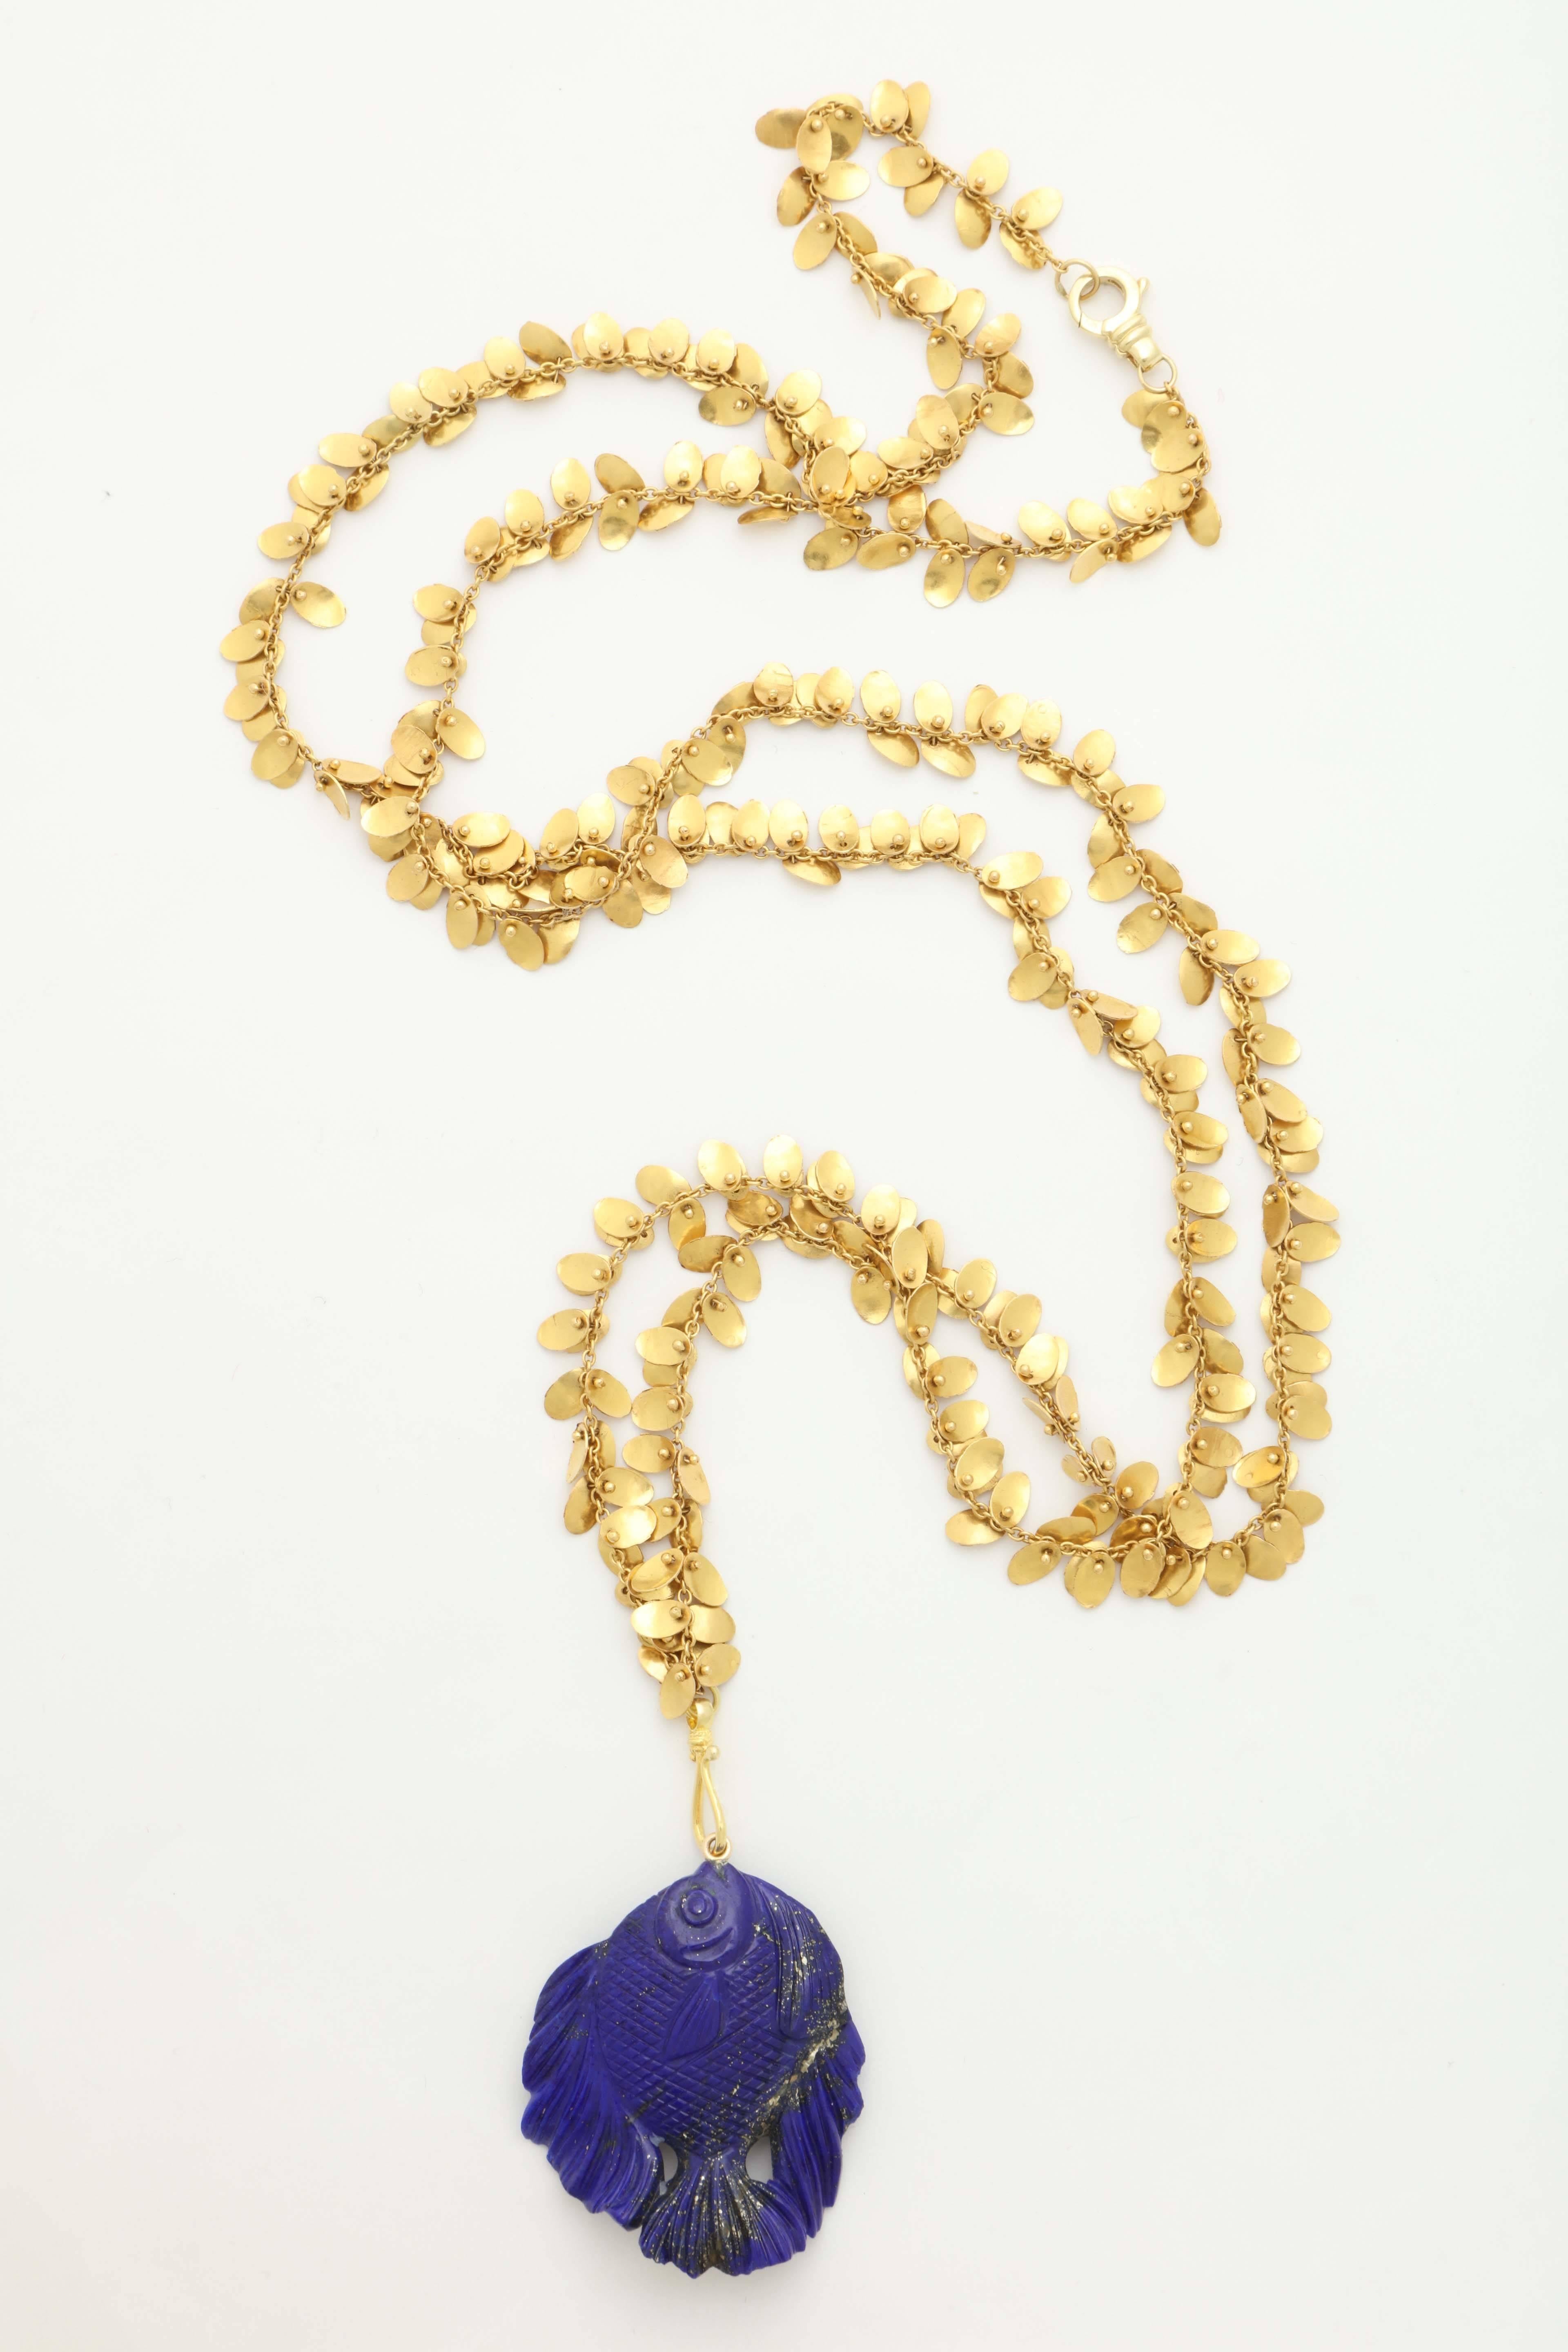 A handmade 18kt yellow gold chain with gold oval discs scattered throughout . There is a lapis lazuli fish pendant suspended from the chain by an 18kt yellow gold hook. The fish was carved in Idar Oberstein.
Length: 42 inches
Length of fish: 1.70